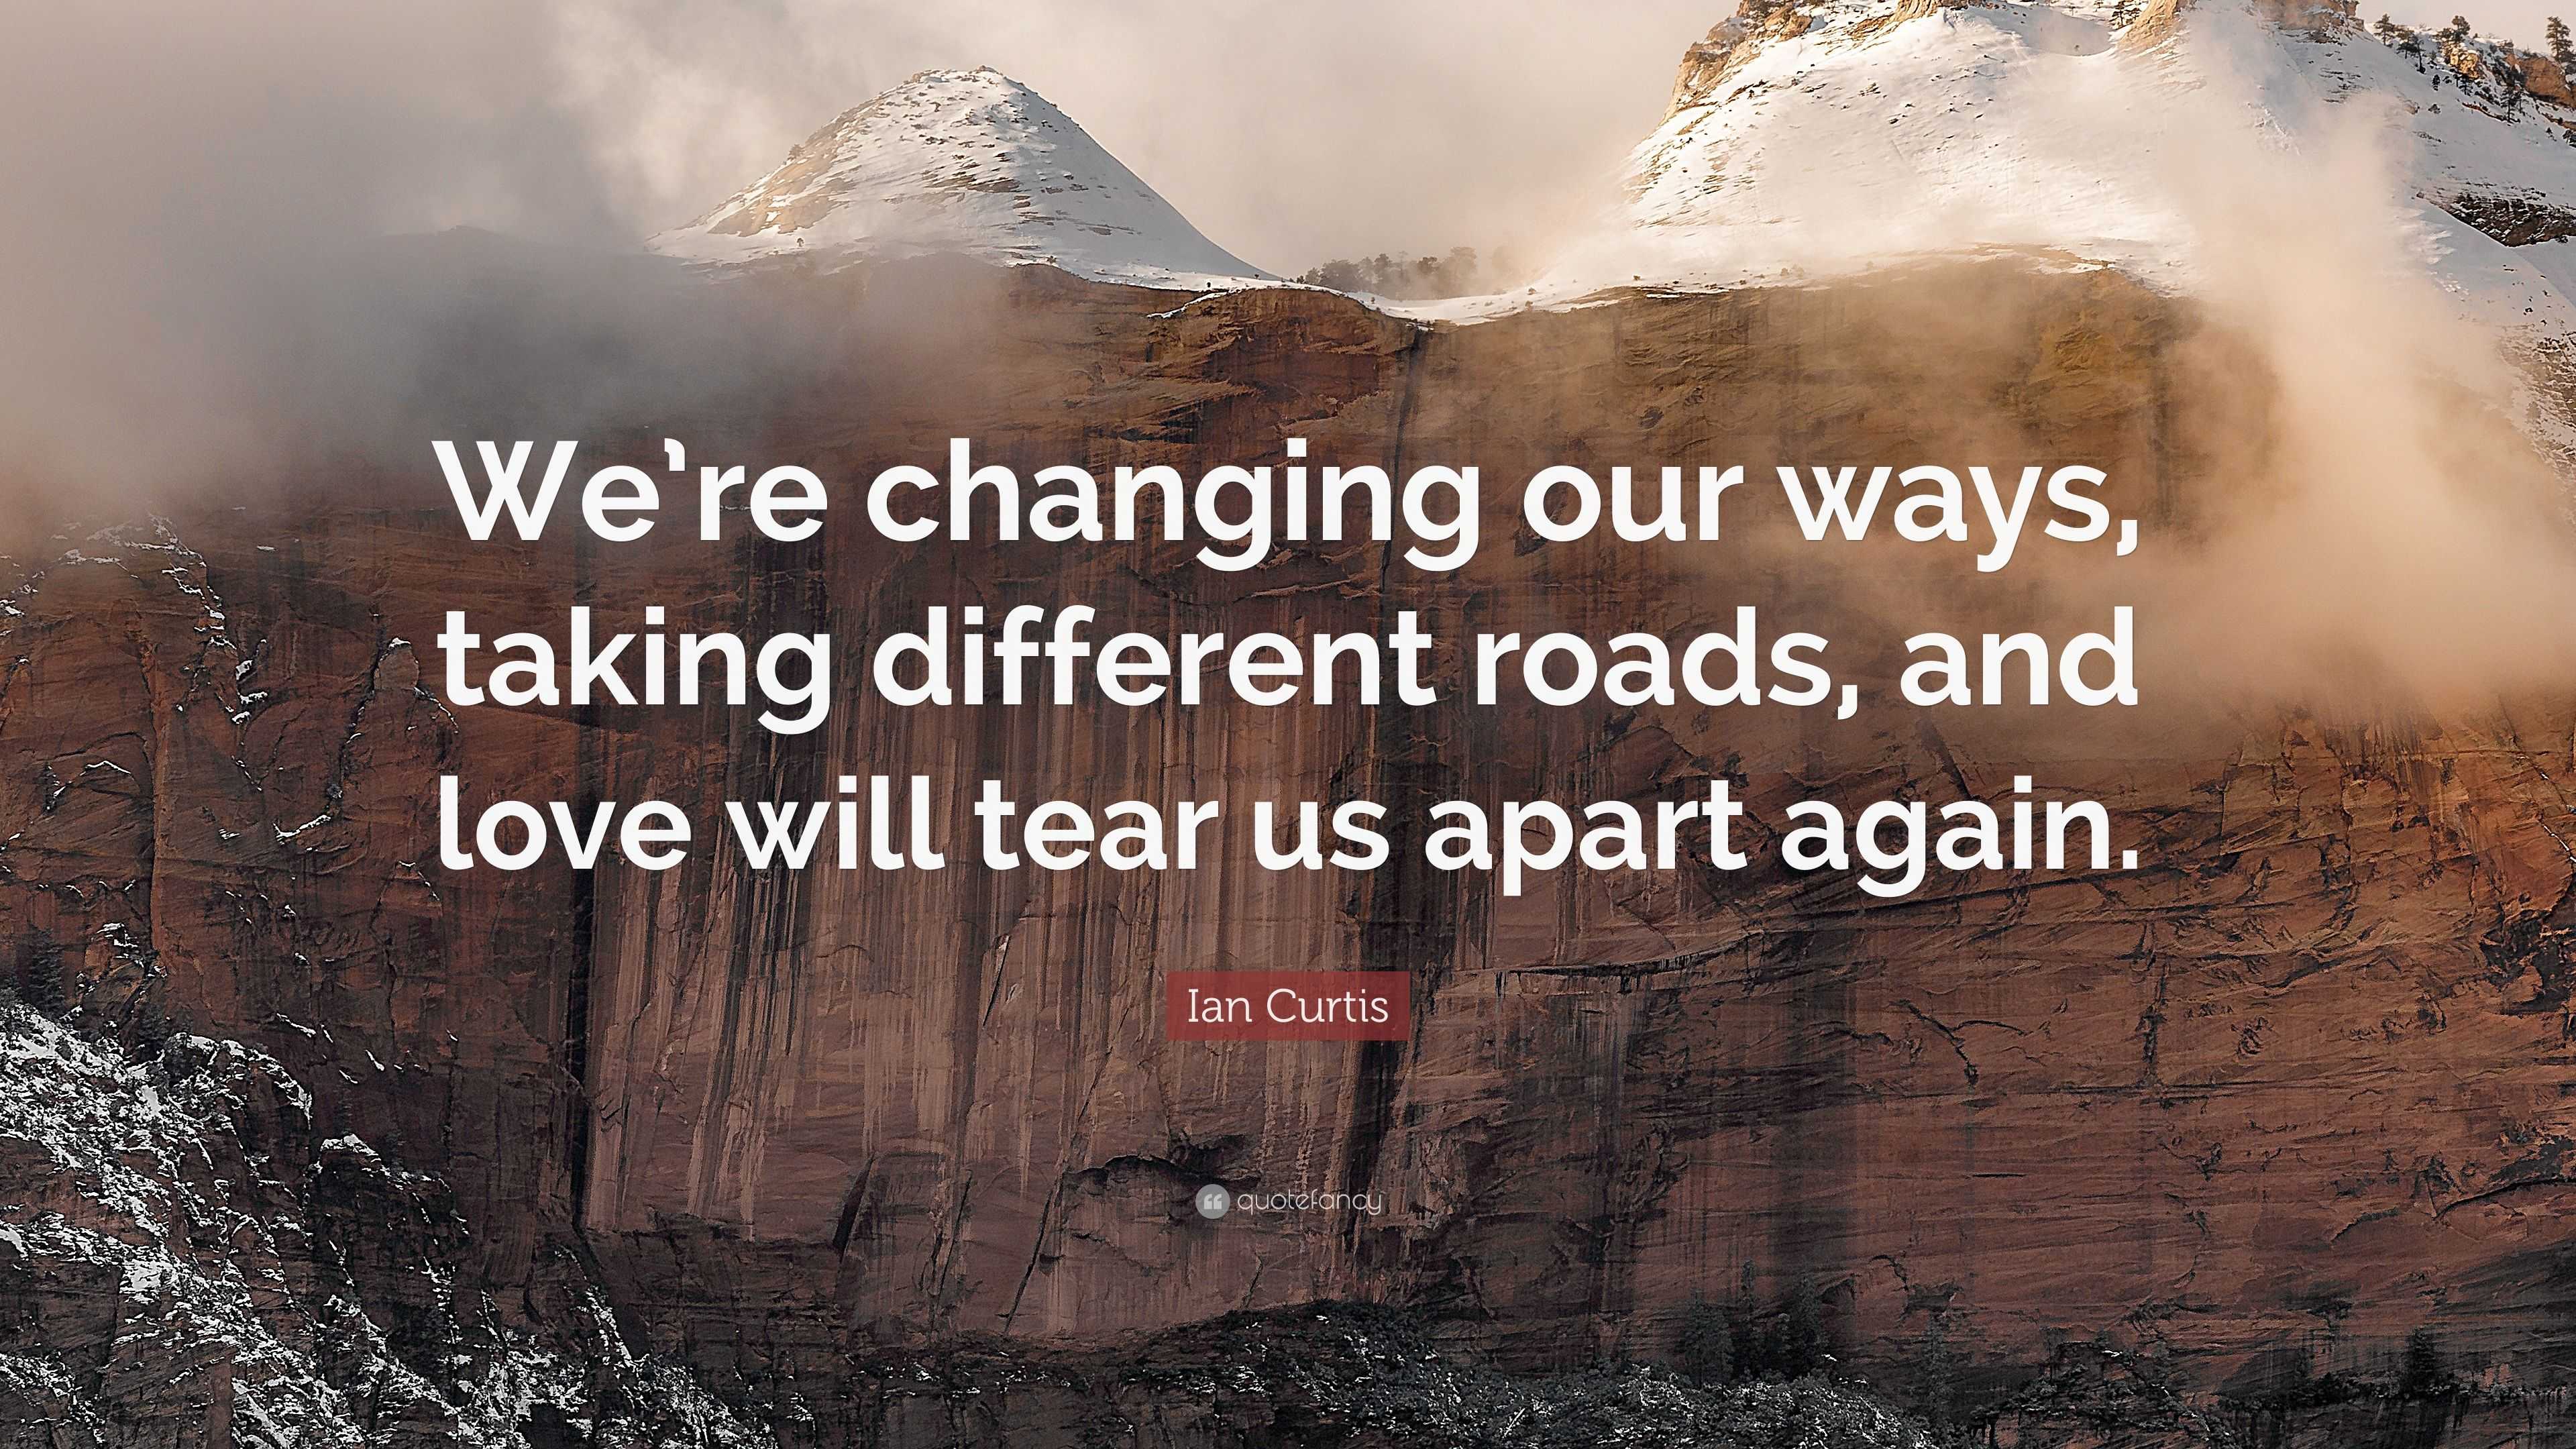 Ian Curtis Quote “We re changing our ways taking different roads